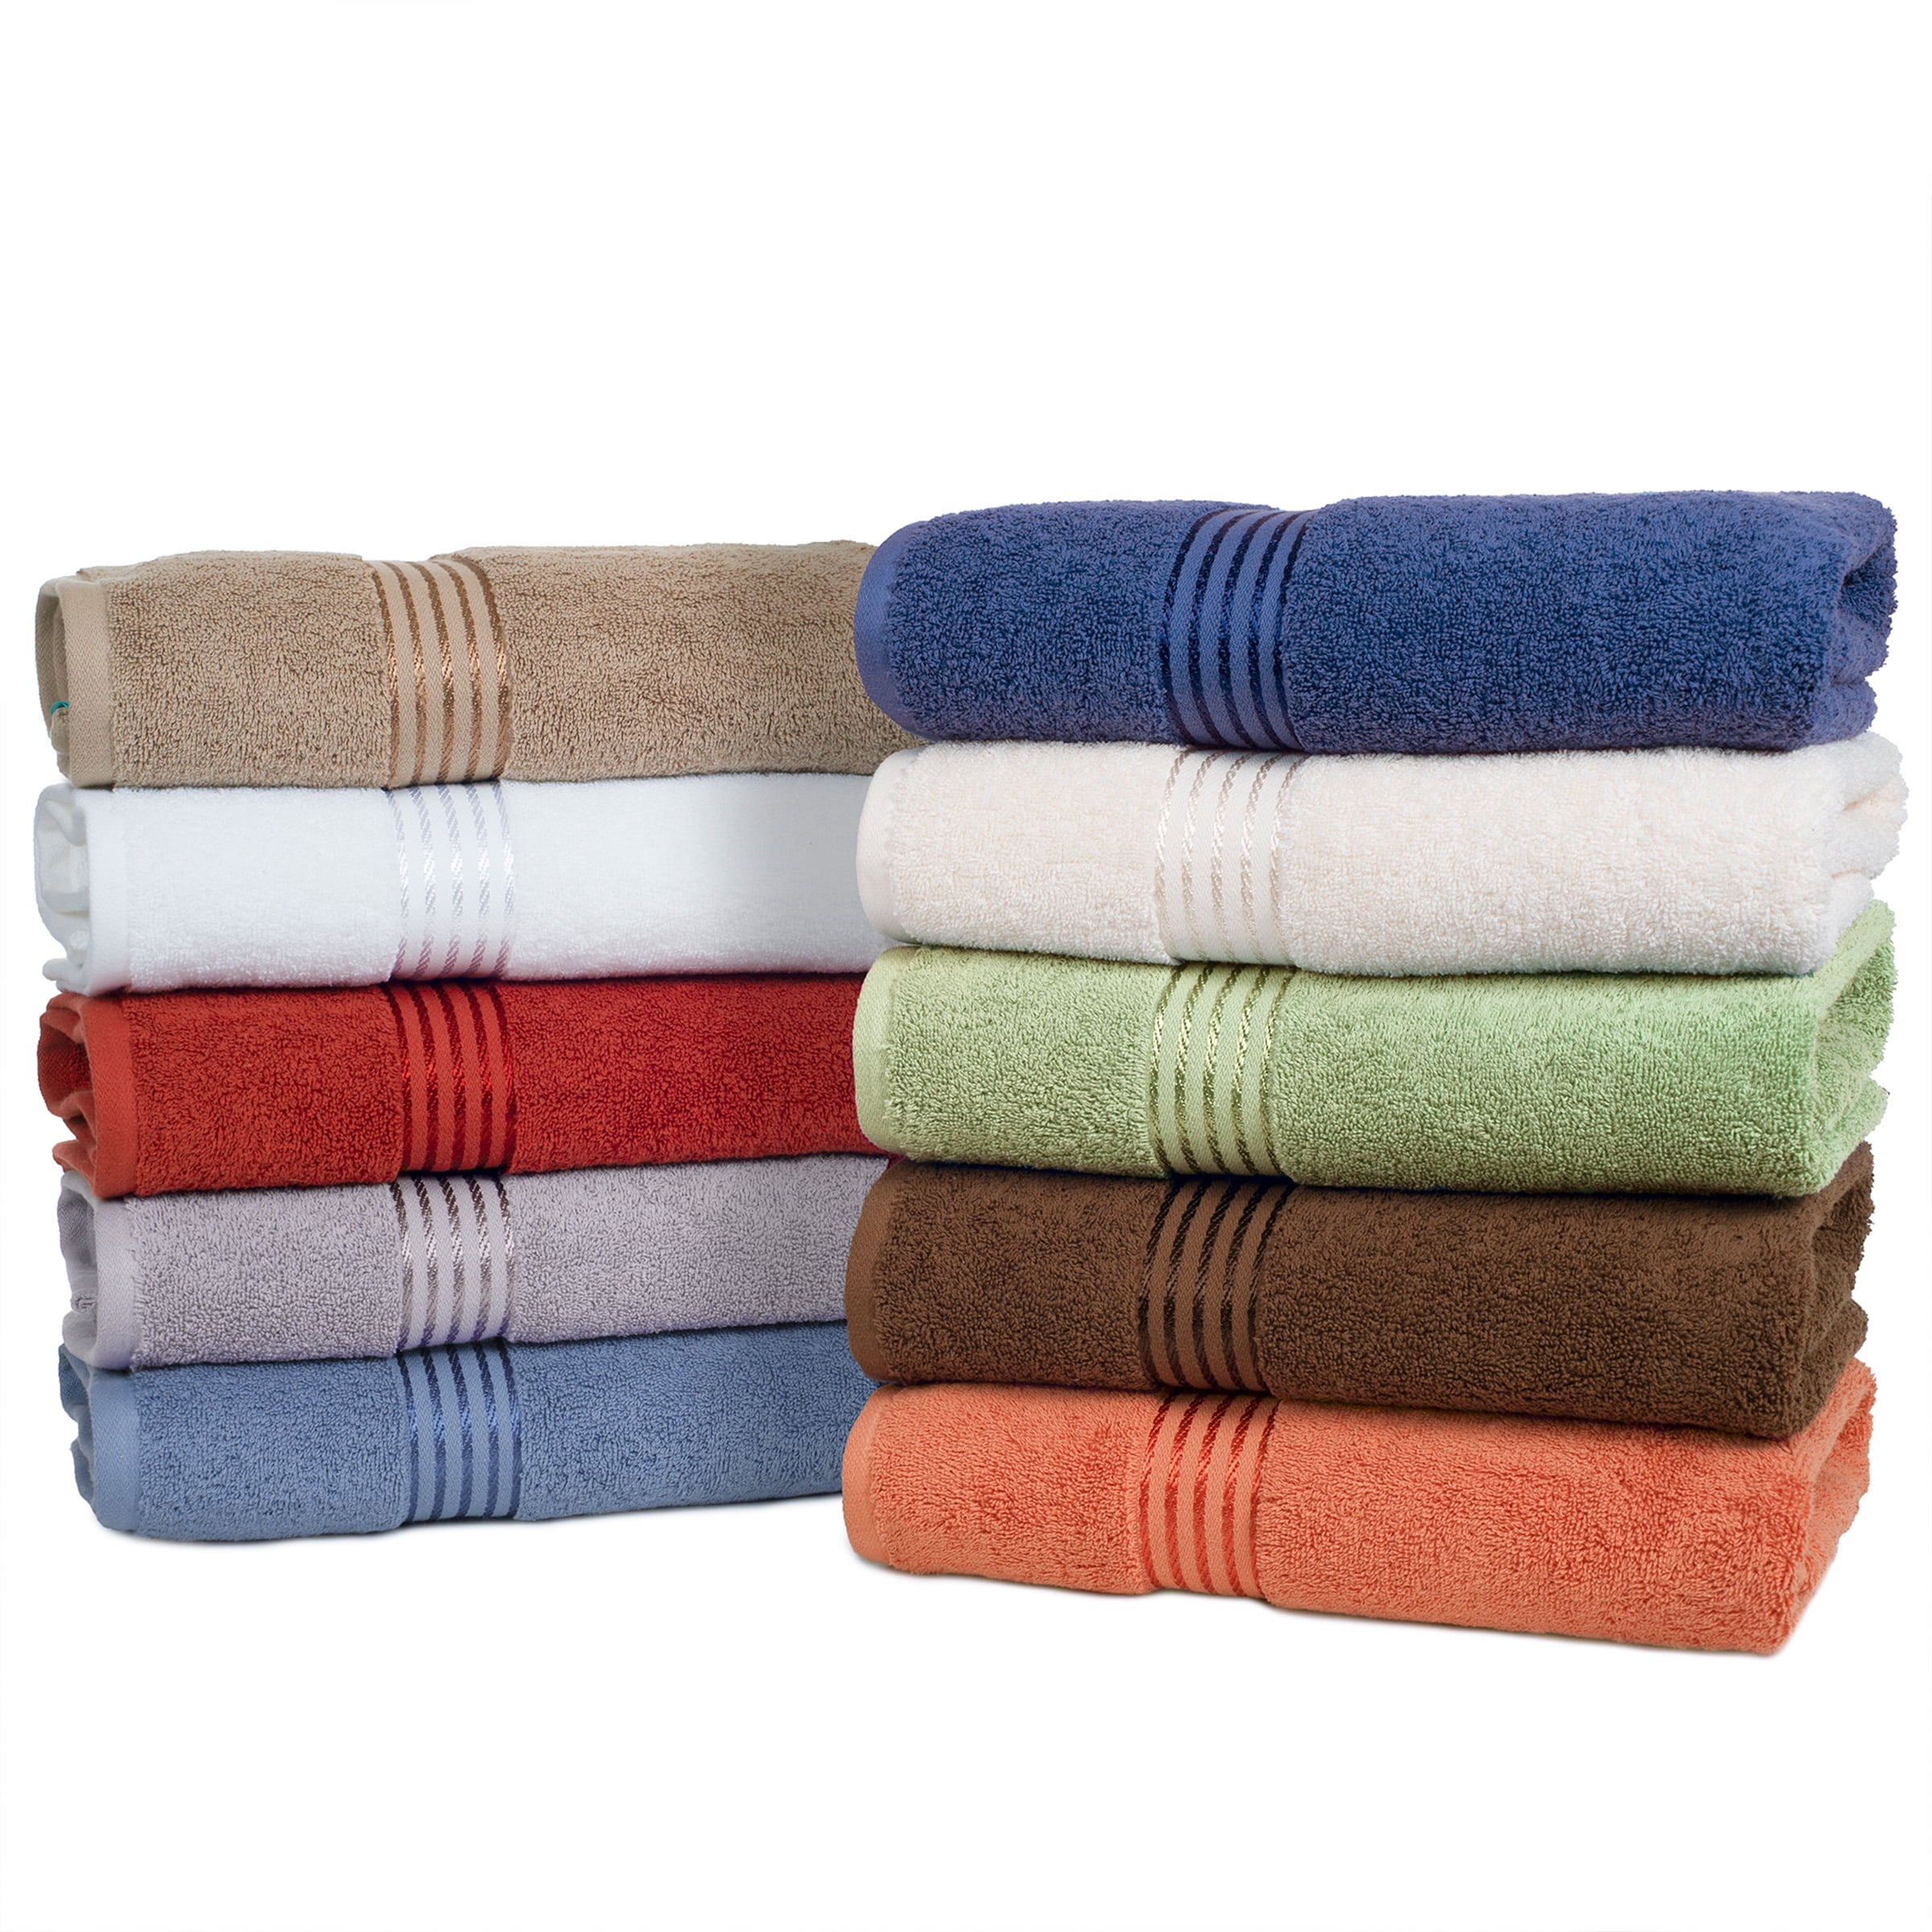 Lavish Home 100% Cotton Dish Cloth Wash Cloth Hand Towel Set of 8 or 16 Kitchen  Bathroom Linens Cleaning Bathing